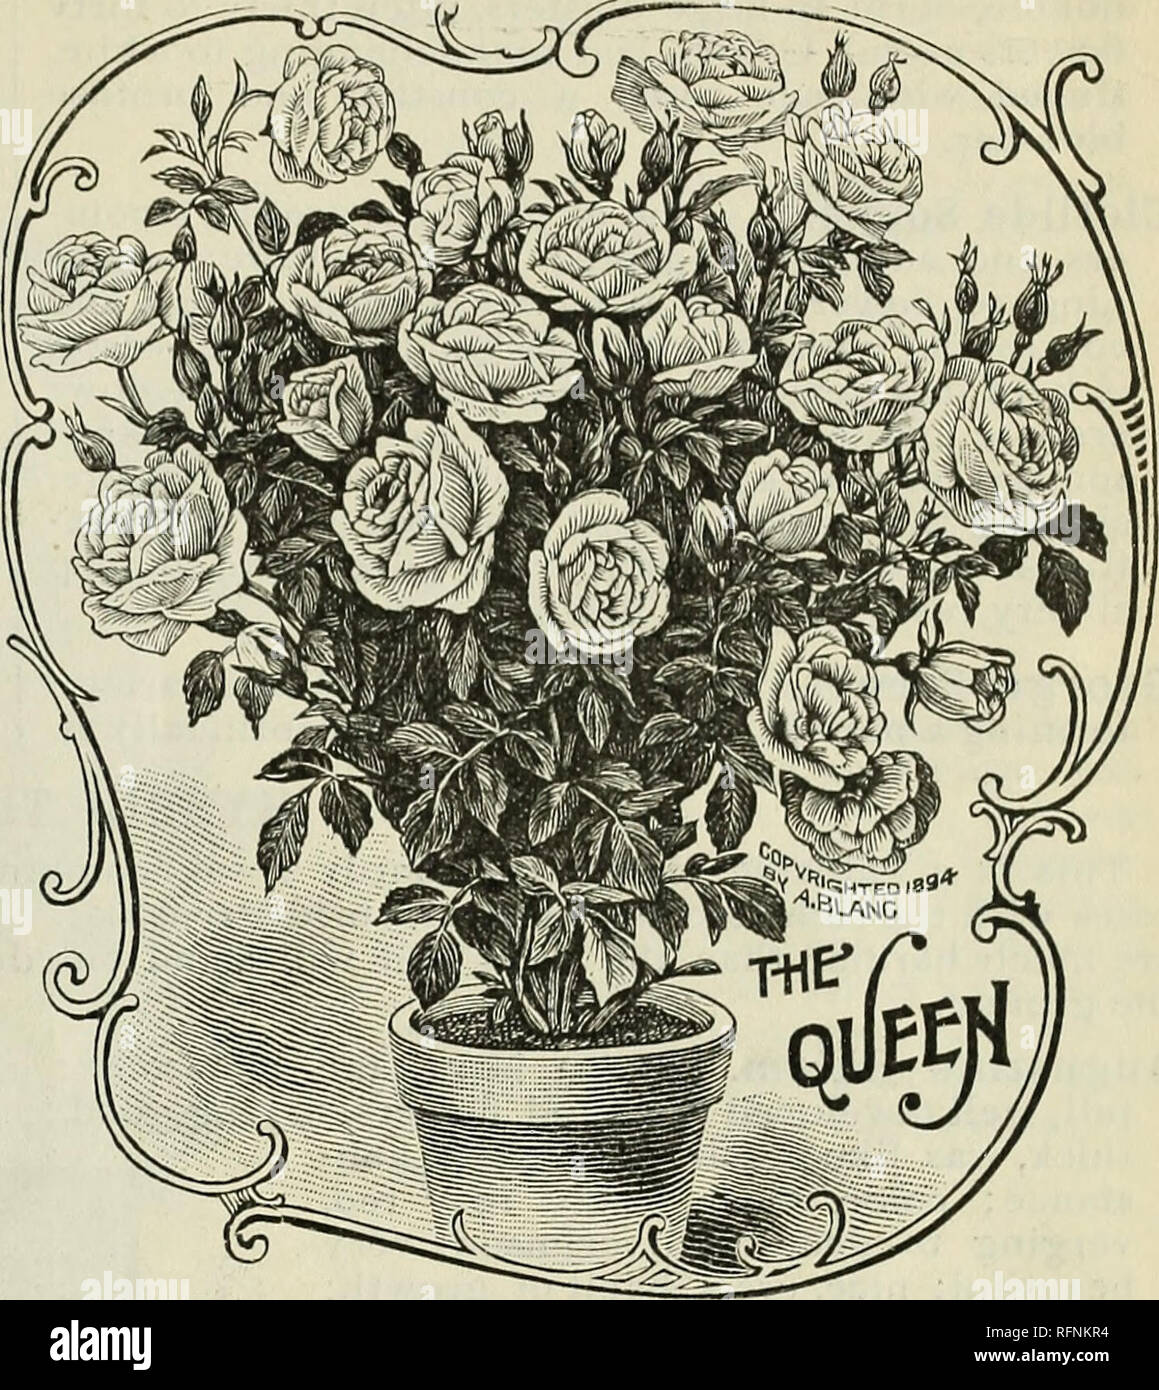 . Spring 1896. Nursery stock Ohio Catalogs; Vegetables Seeds Catalogs; Plants, Ornamental Catalogs; Fruit trees Seedlings Catalogs; Fruit Catalogs; Trees Seedlings Catalogs; Nursery stock; Vegetables; Plants, Ornamental; Fruit trees; Fruit; Trees. ROSES. &quot;3. Sombreuil. Large, fine formed flowers; white, tinted delicate rose; blooms in clusters. 15c. SafPano. Bright apricot yellow, changing to orange and fawn, sometimes tinted with rose; valued highly for its beautiful buds ; fragrant. The Queen. A pure white rose, elegant shape and very large size. A vigorous and healthy grower and contin Stock Photo